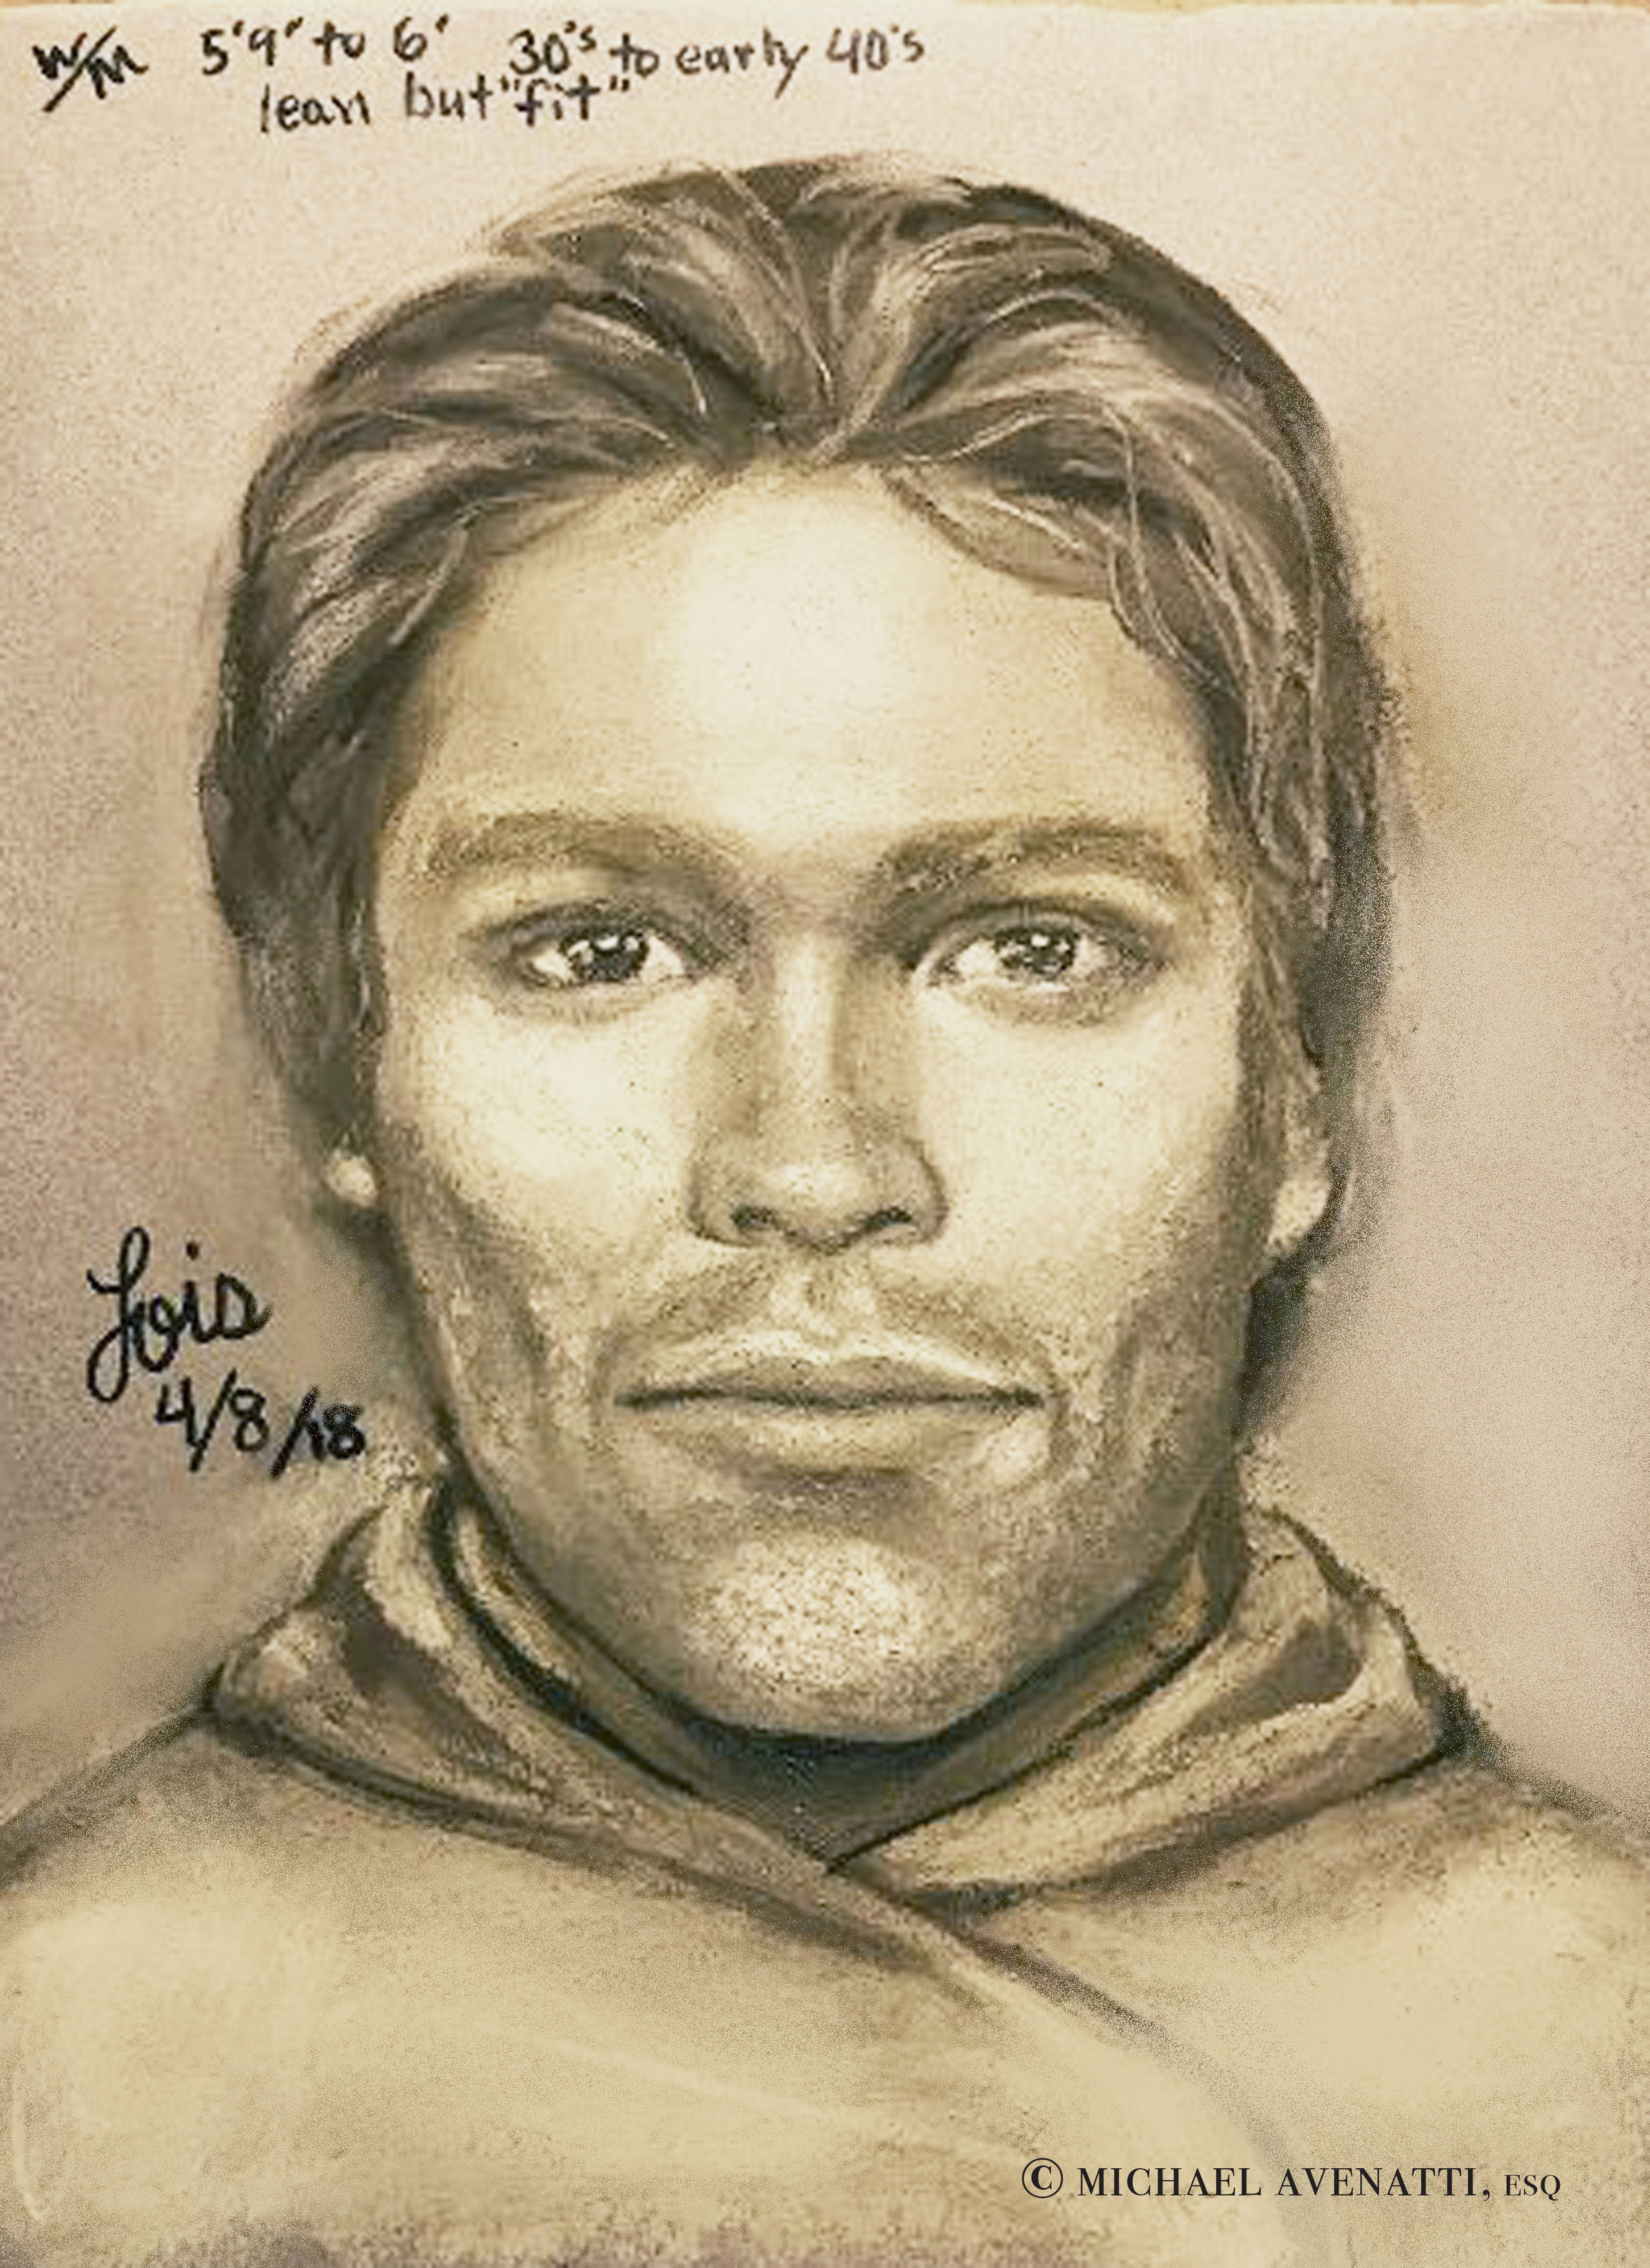 The sketch that reports to show the man that the adult film actress Stormy Daniels says threatened her (Michael Avenatti via AP)